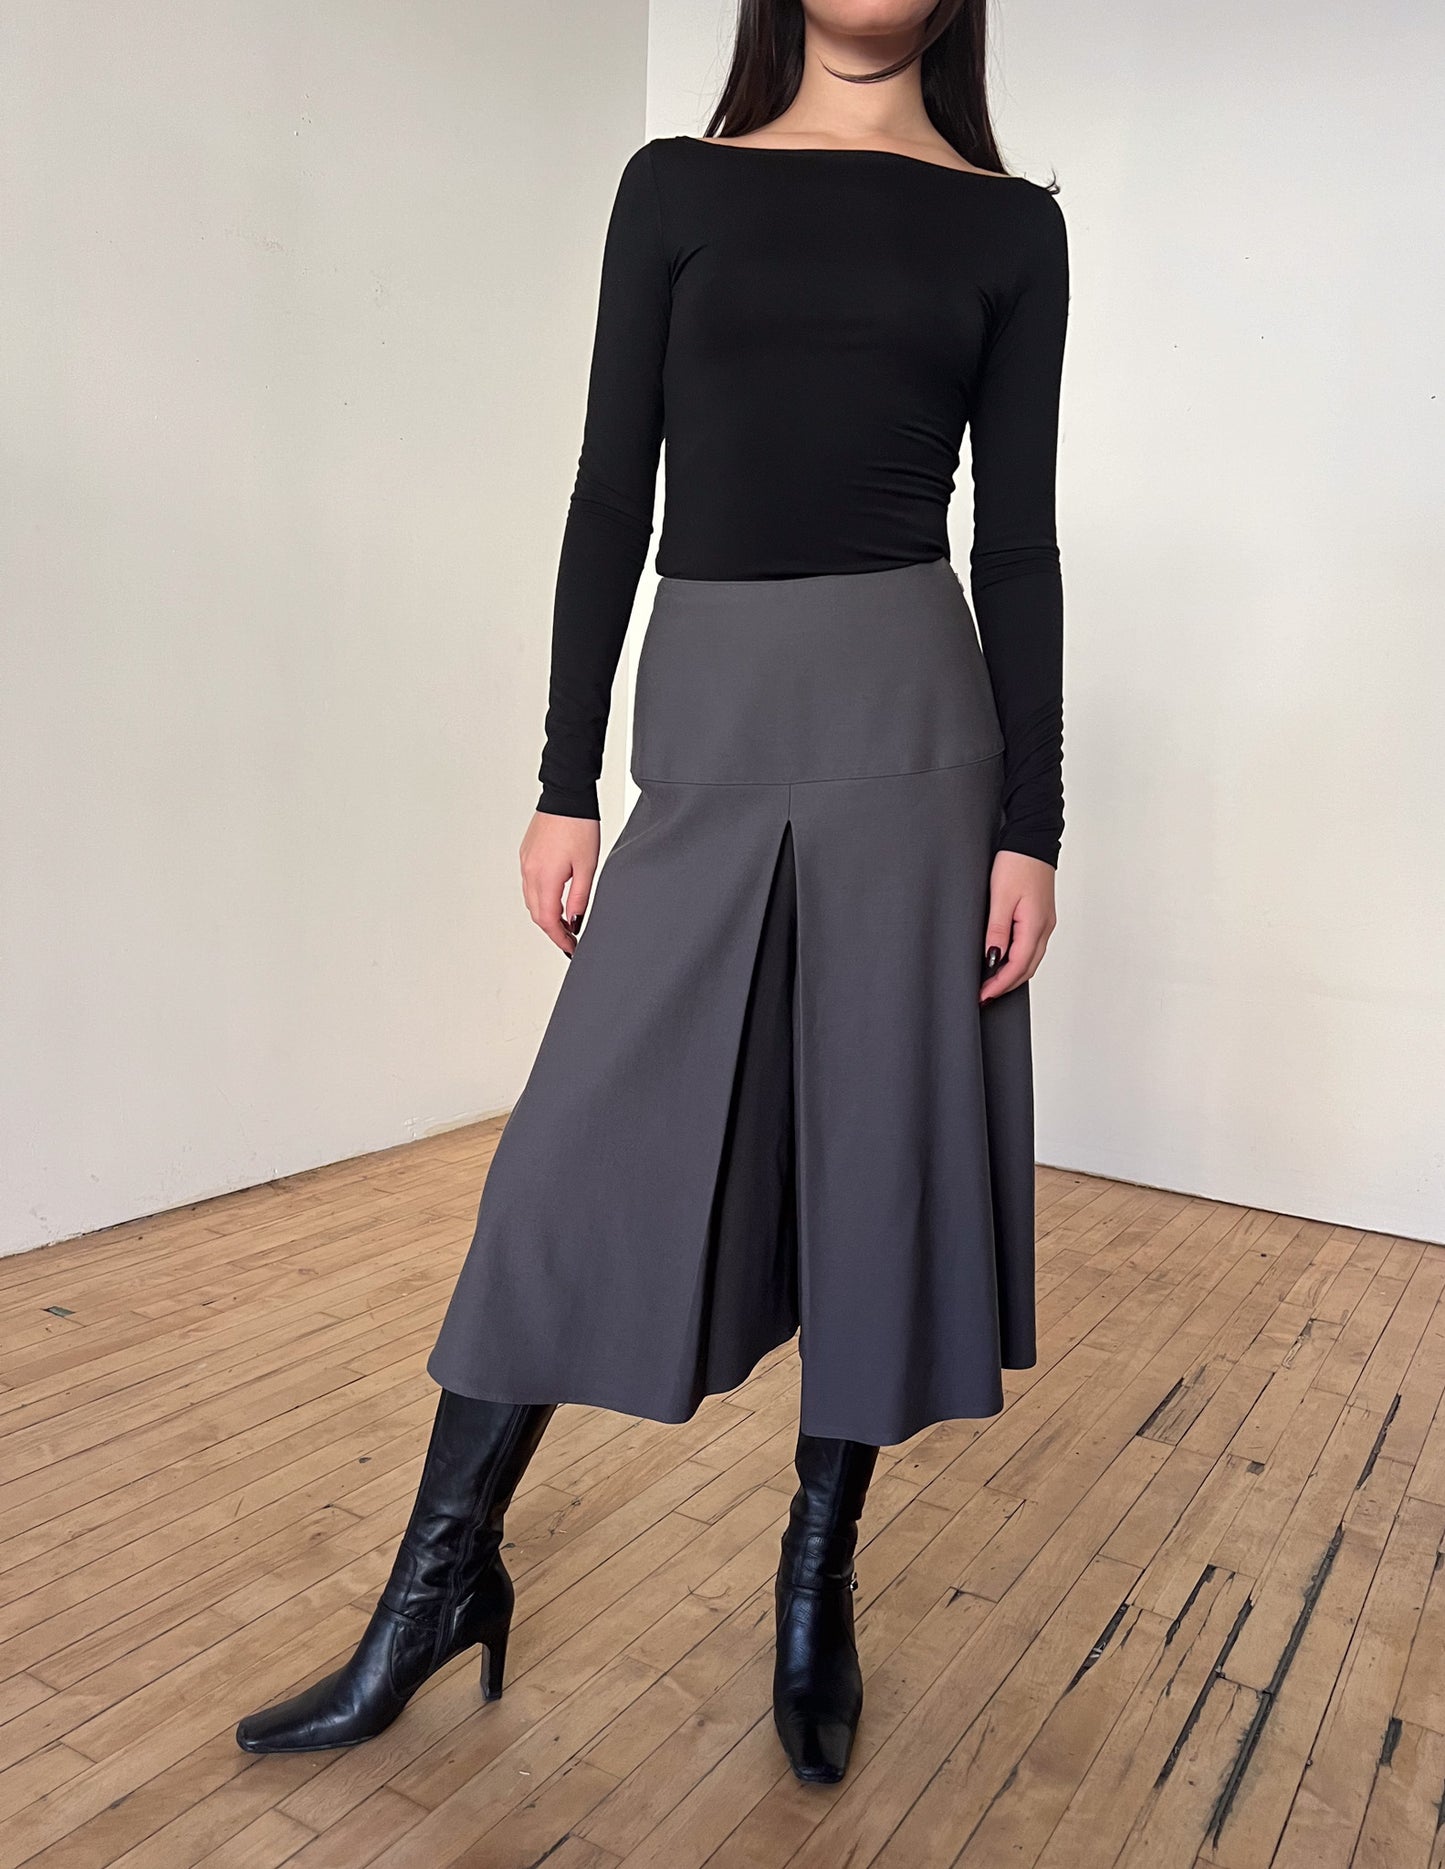 Christian Dior Pleated Lace Up Culottes